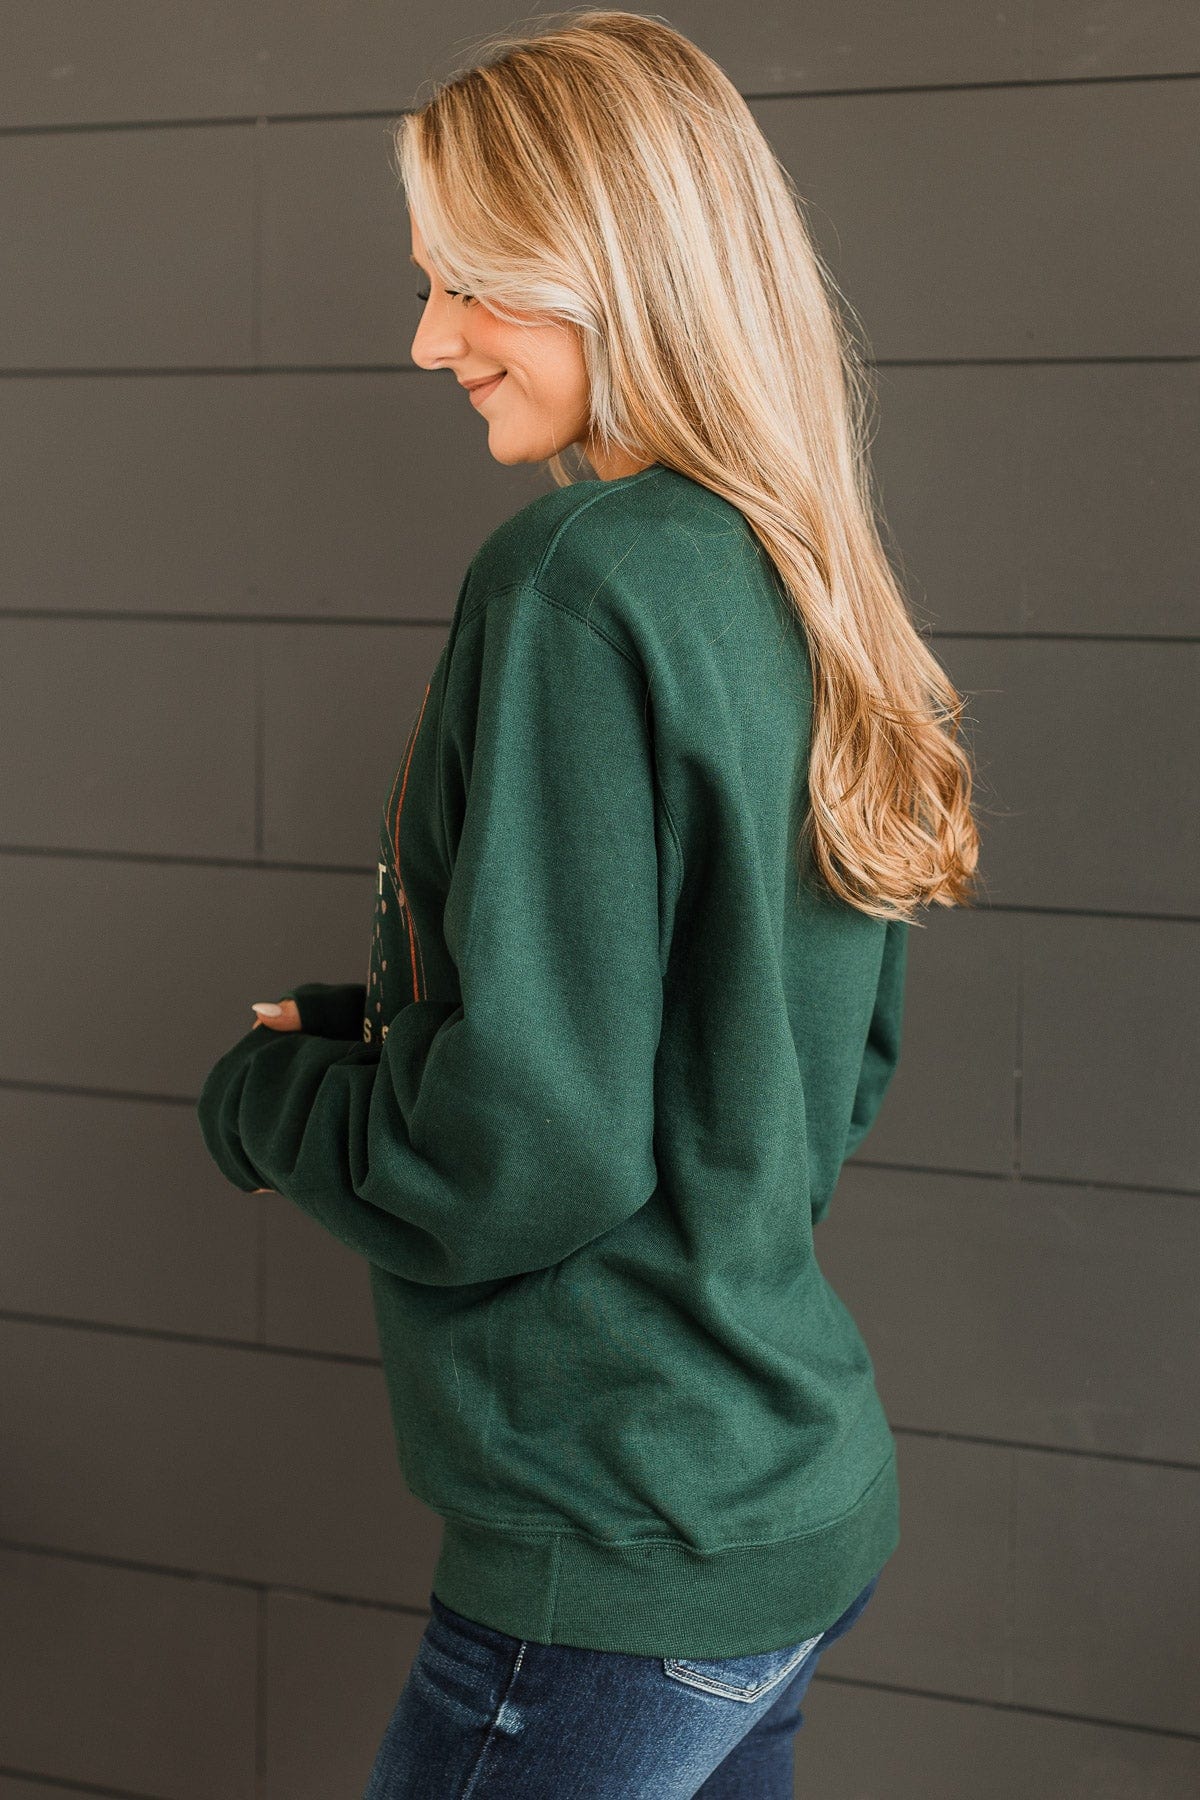 "Harvest Your Happiness" Crew Neck- Hunter Green